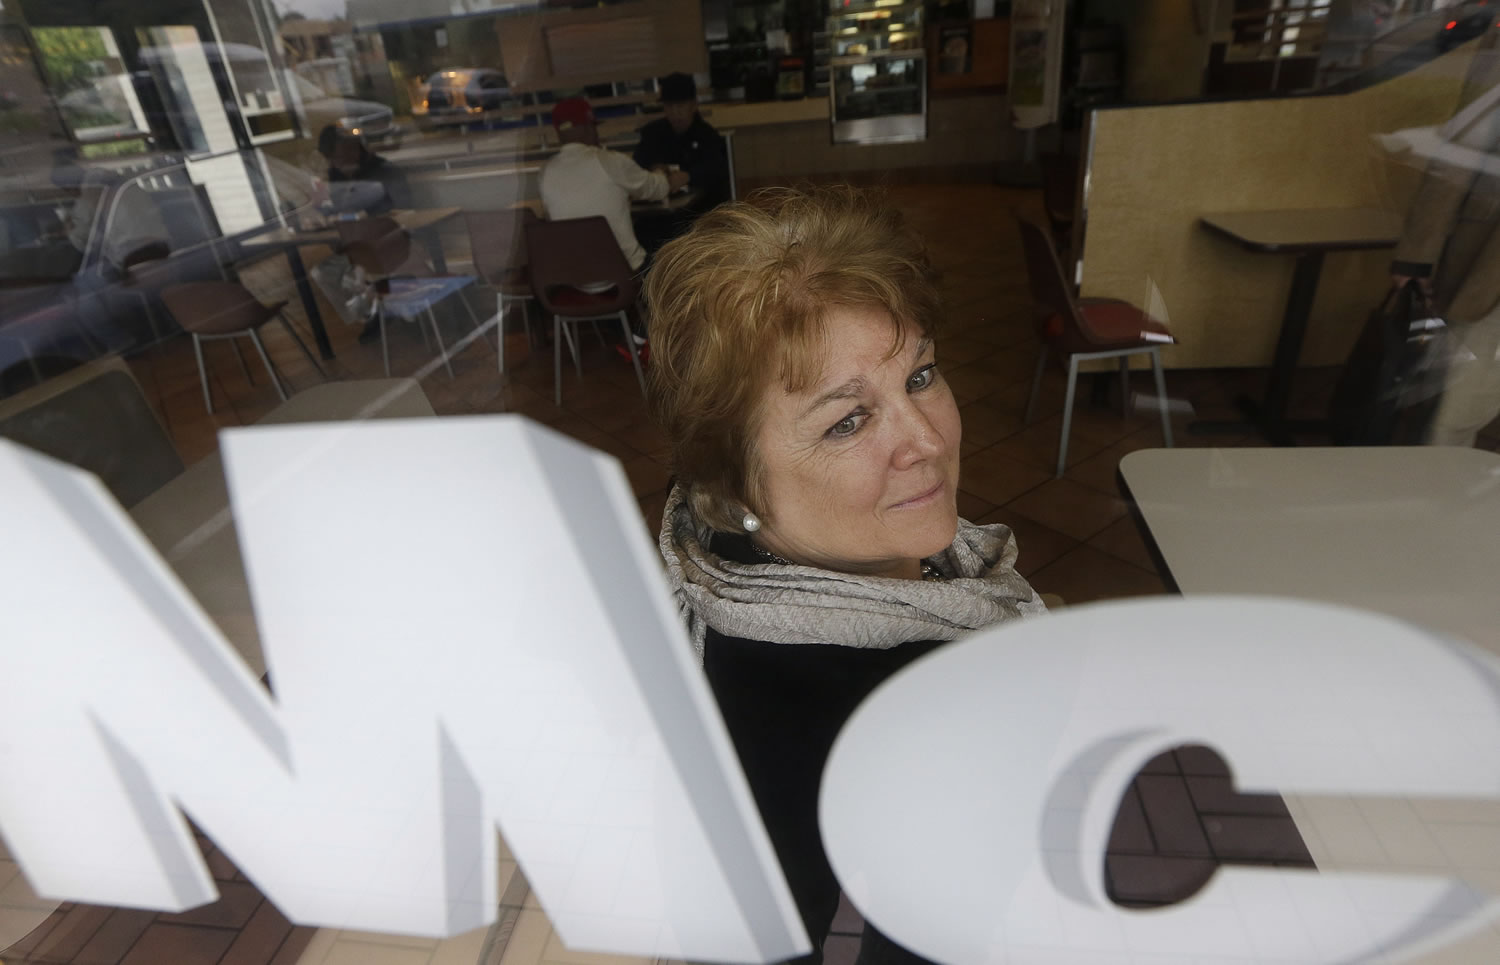 Kathryn Slater-Carter poses for photographs at a McDonald's restaurant she owns in Daly City, Calif.,